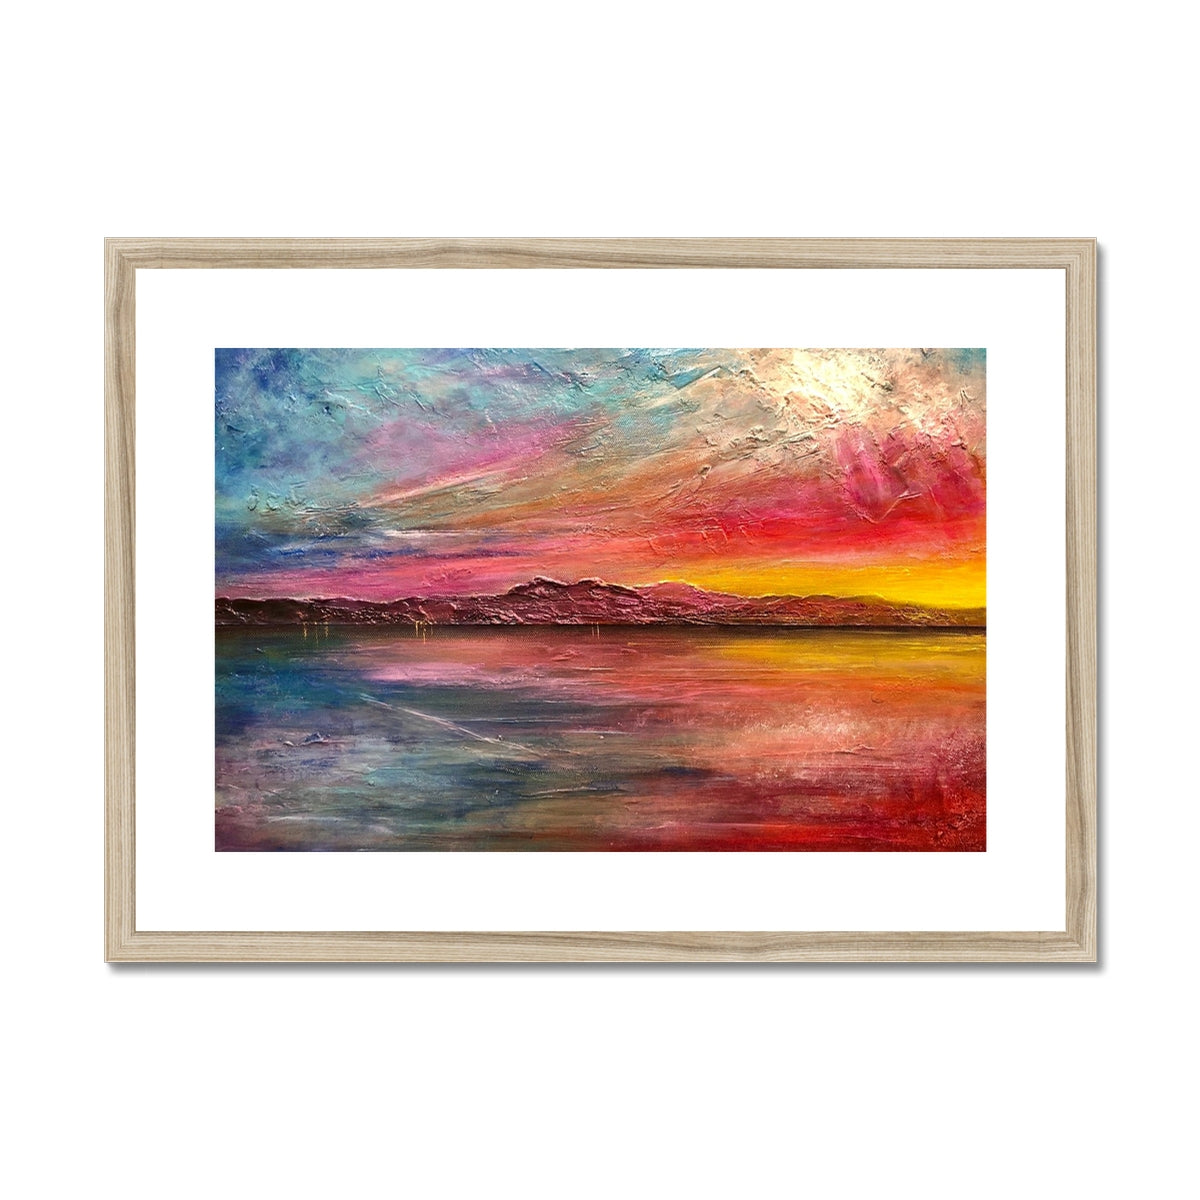 Arran Sunset ii Painting | Framed & Mounted Prints From Scotland-Framed & Mounted Prints-Arran Art Gallery-A2 Landscape-Natural Frame-Paintings, Prints, Homeware, Art Gifts From Scotland By Scottish Artist Kevin Hunter